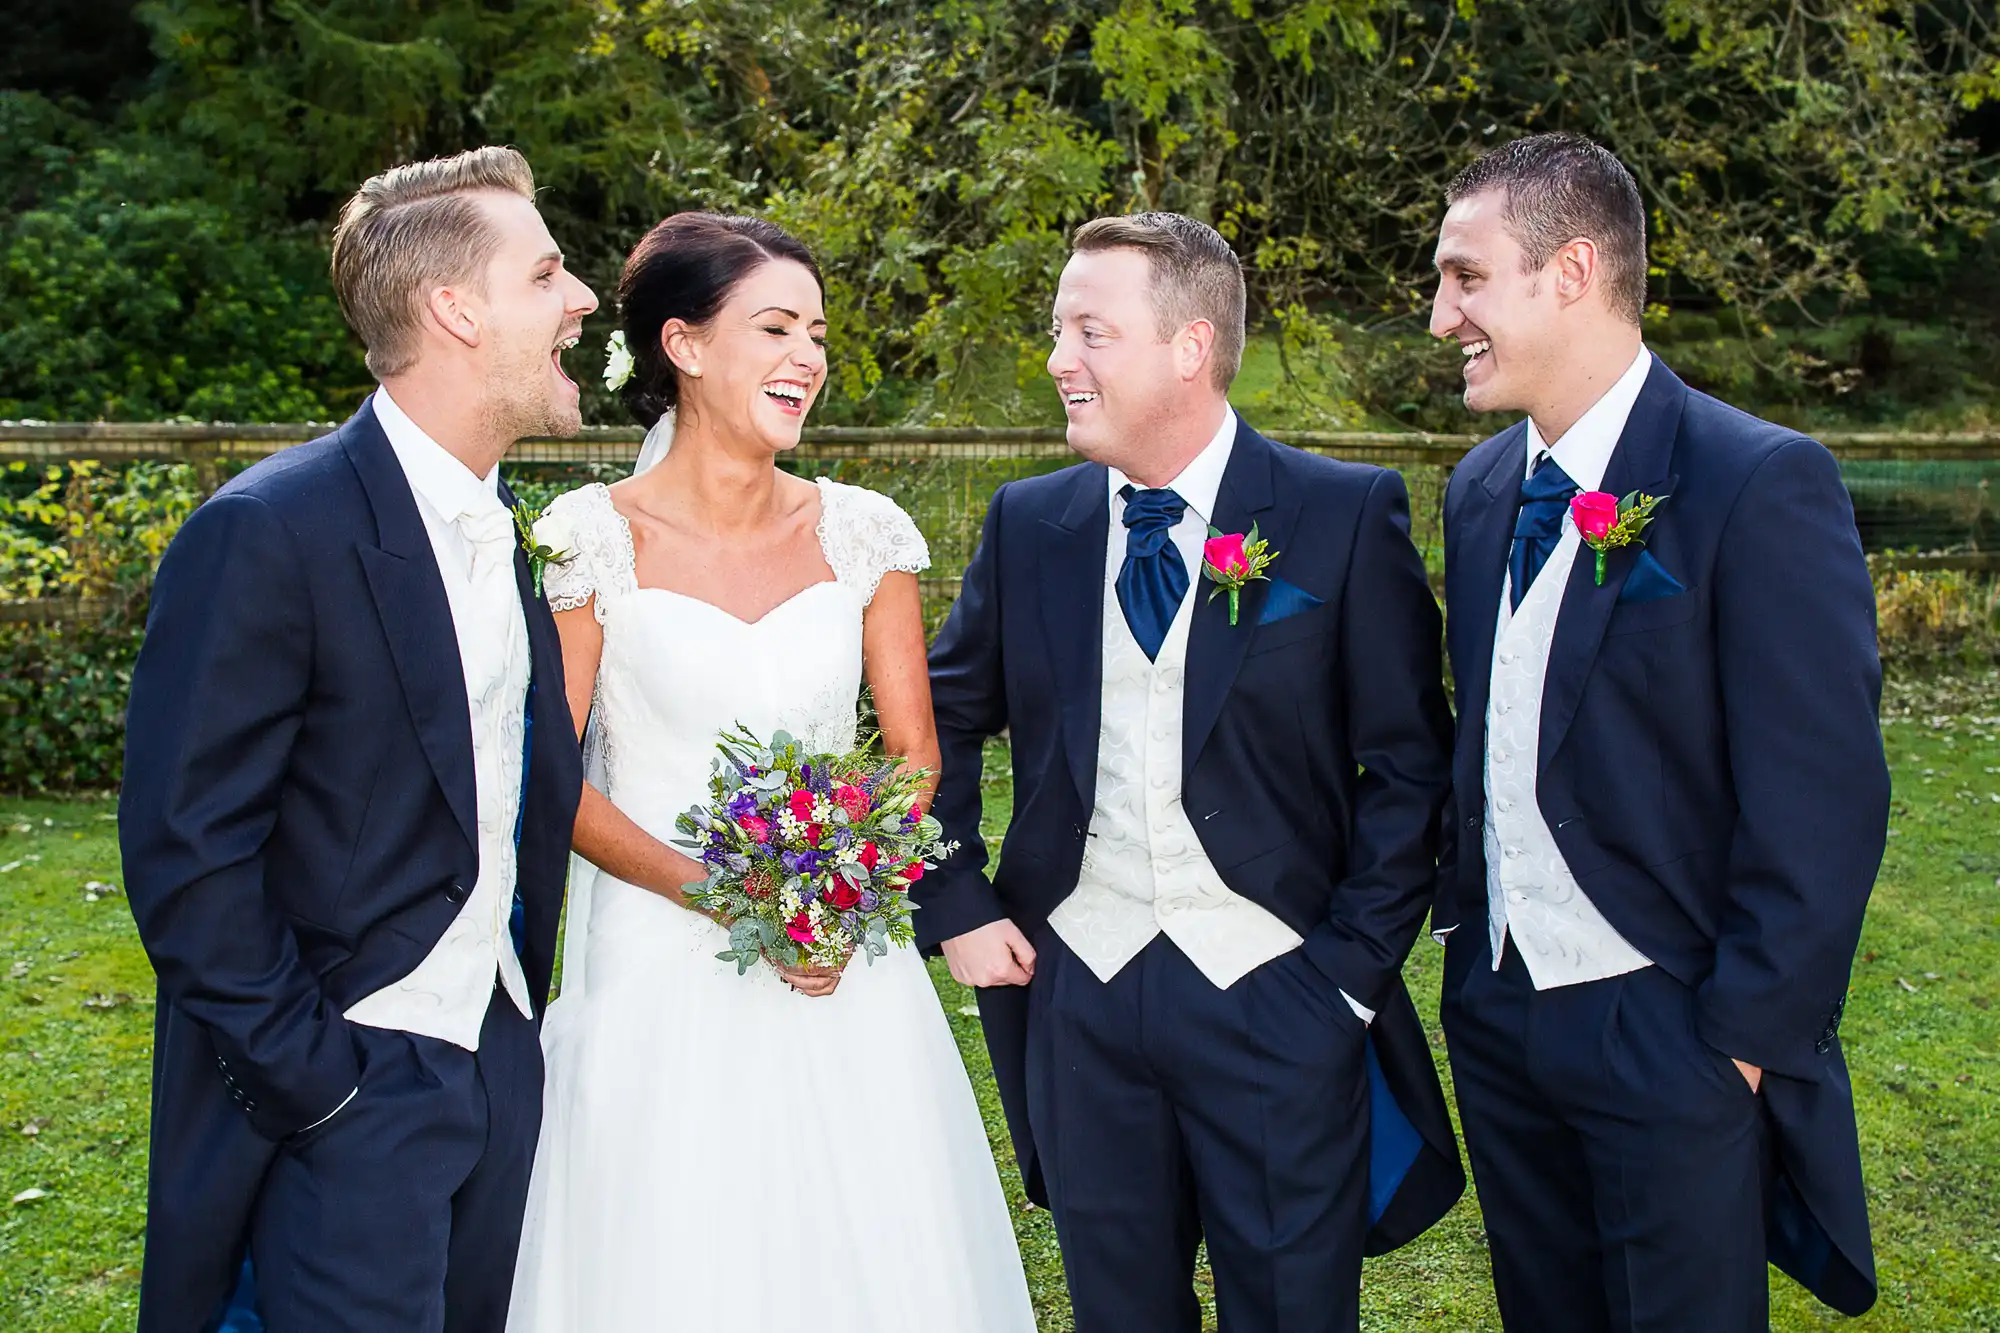 A bride and three men in suits laughing together outdoors, with the bride holding a colorful bouquet.